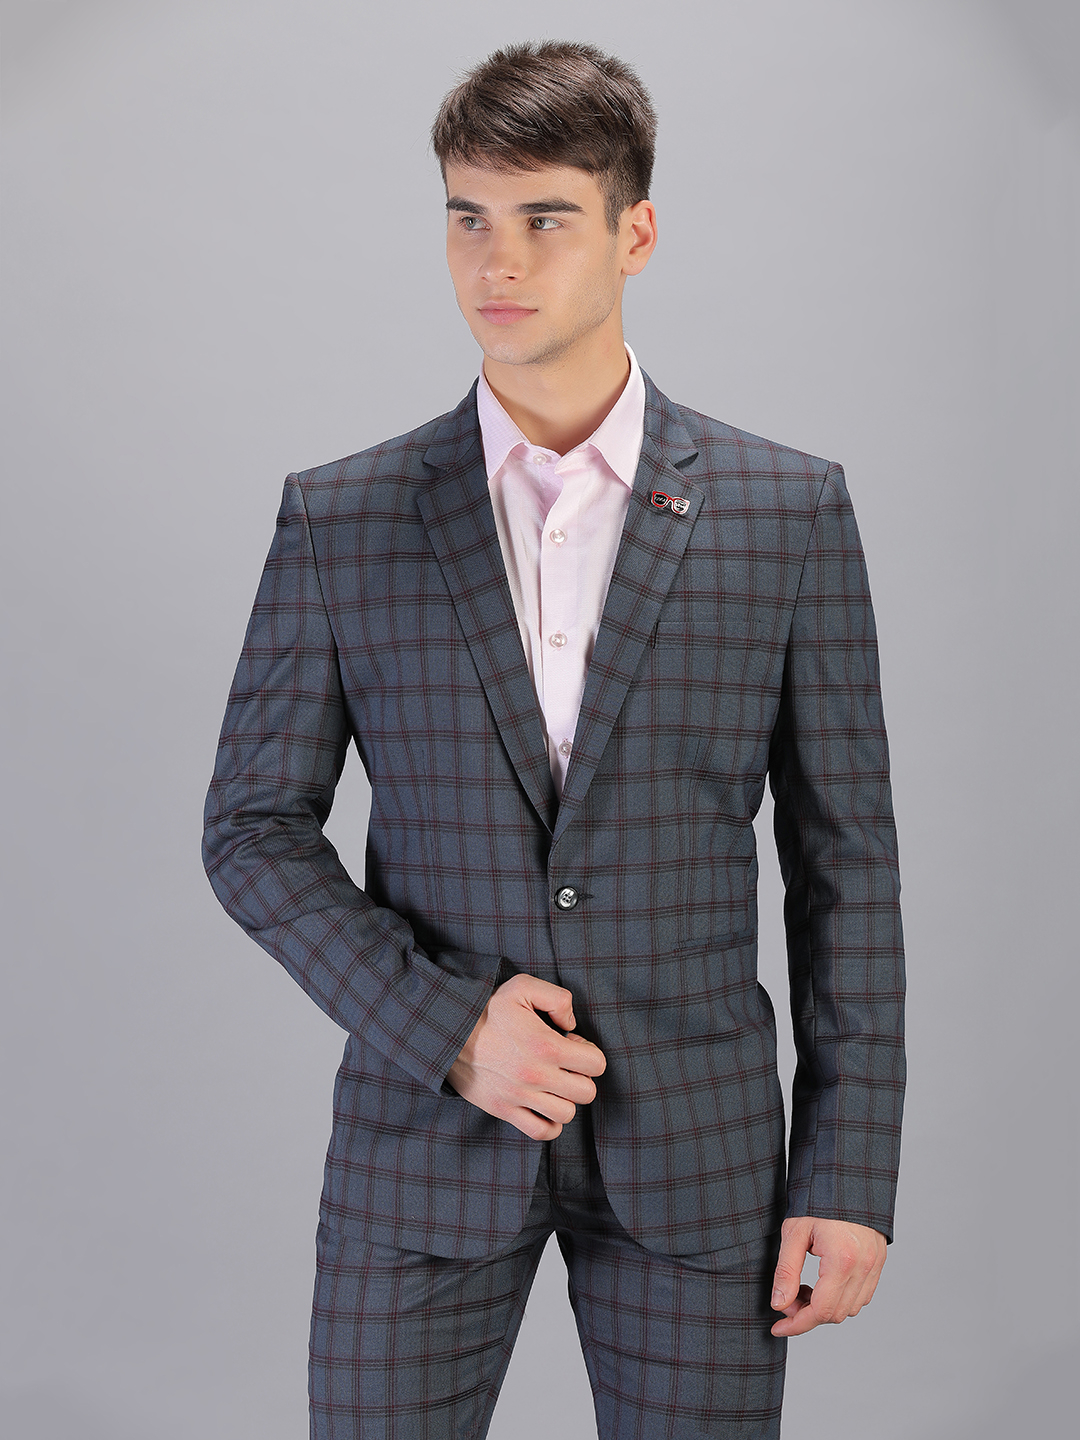 Rent/Buy Dark Grey Checks Full Suit | Home Trial | Free Delivery ...